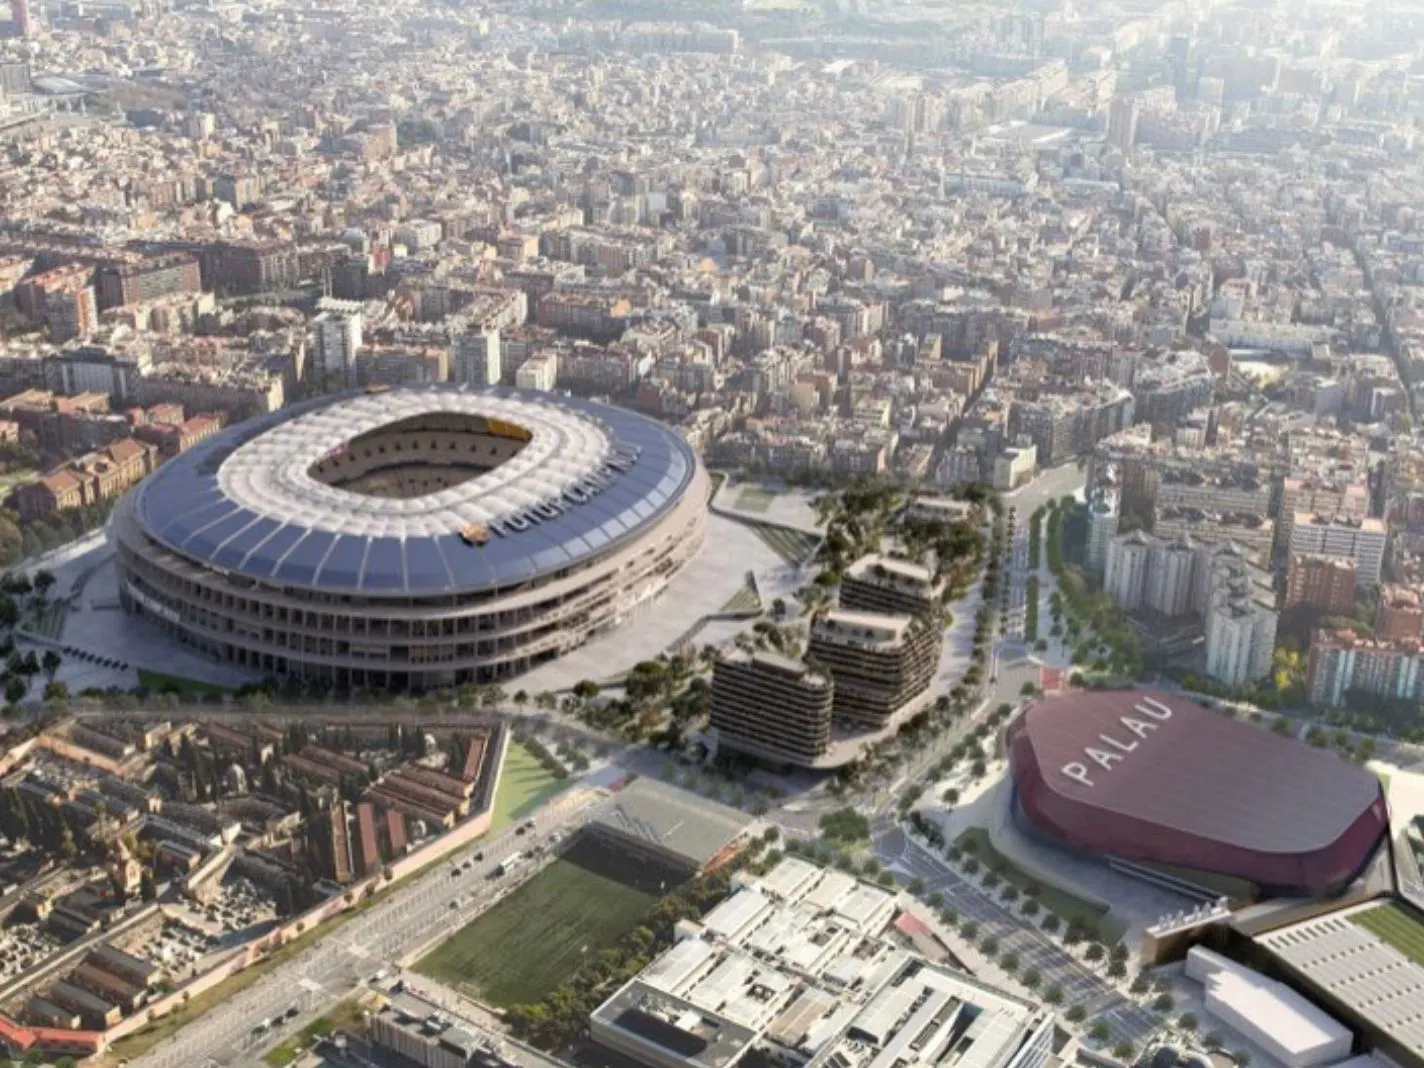 CGI image of Camp Nou reveal how it will look in the future